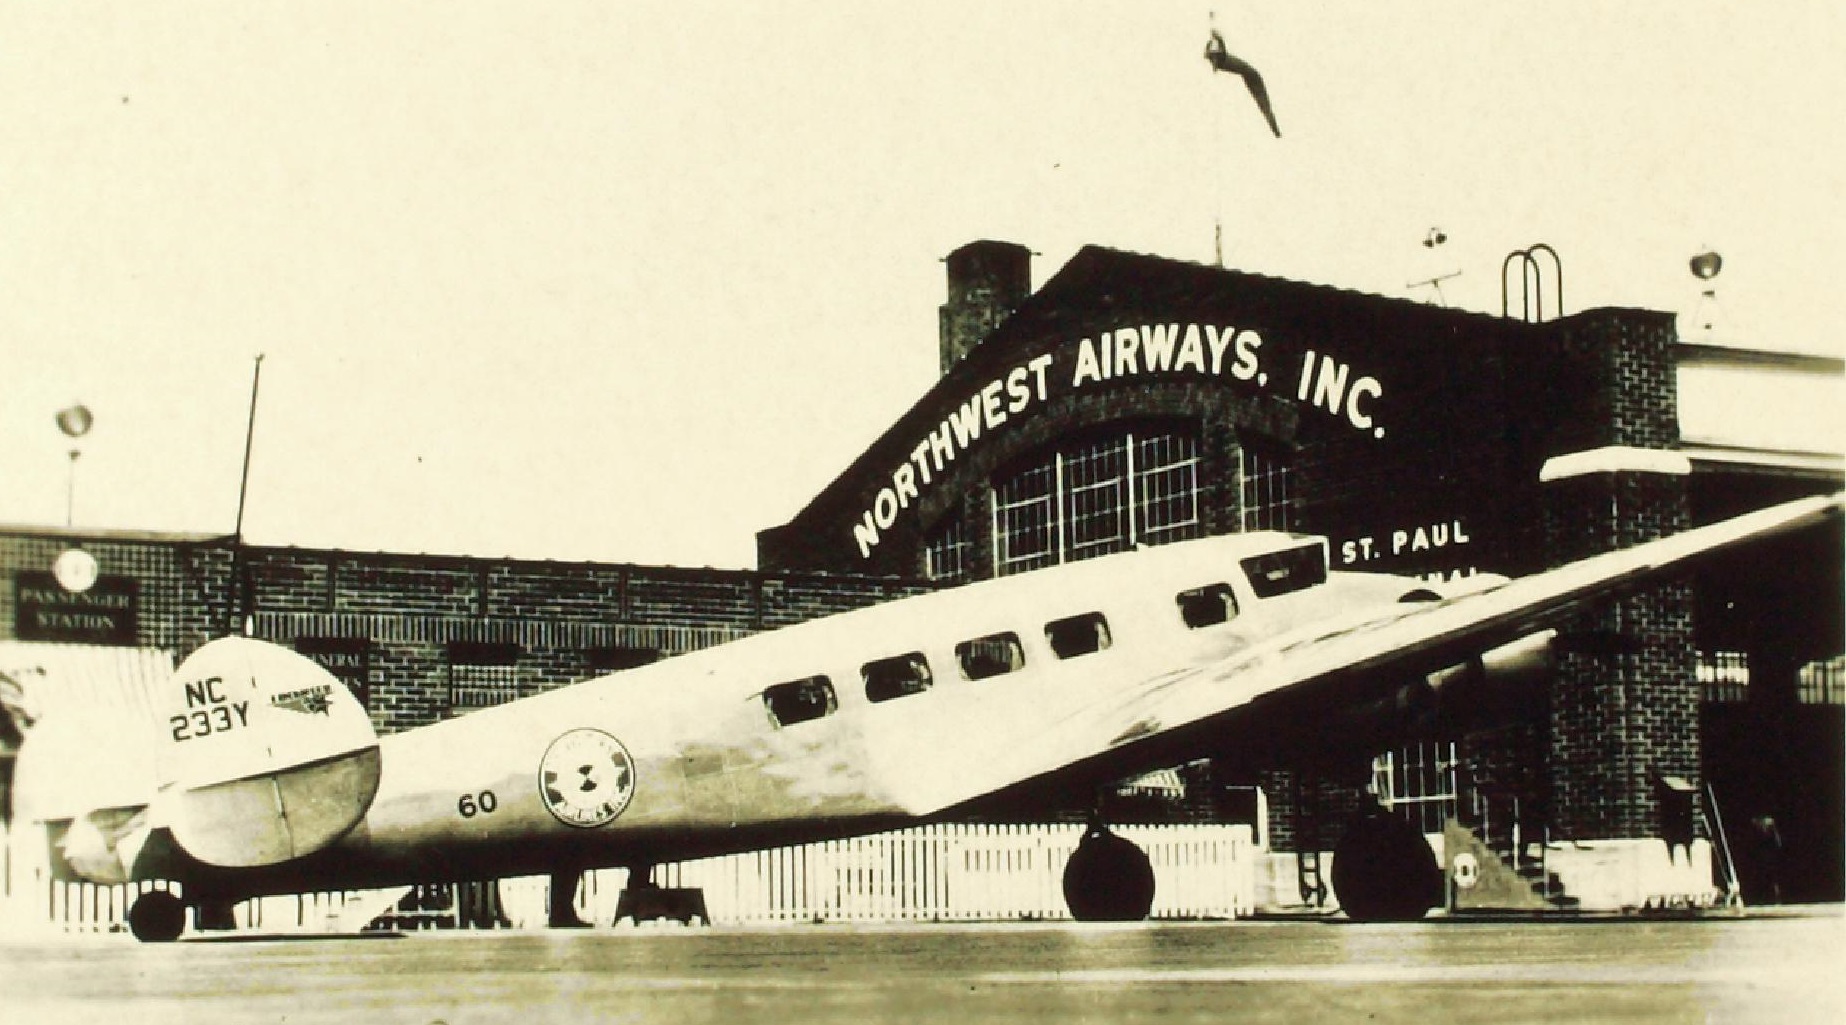 Lockheed Model 10 Electra NC233Y at St. Paul, Minnesota, 1934. (San Diego Air and Space Museum Archives)